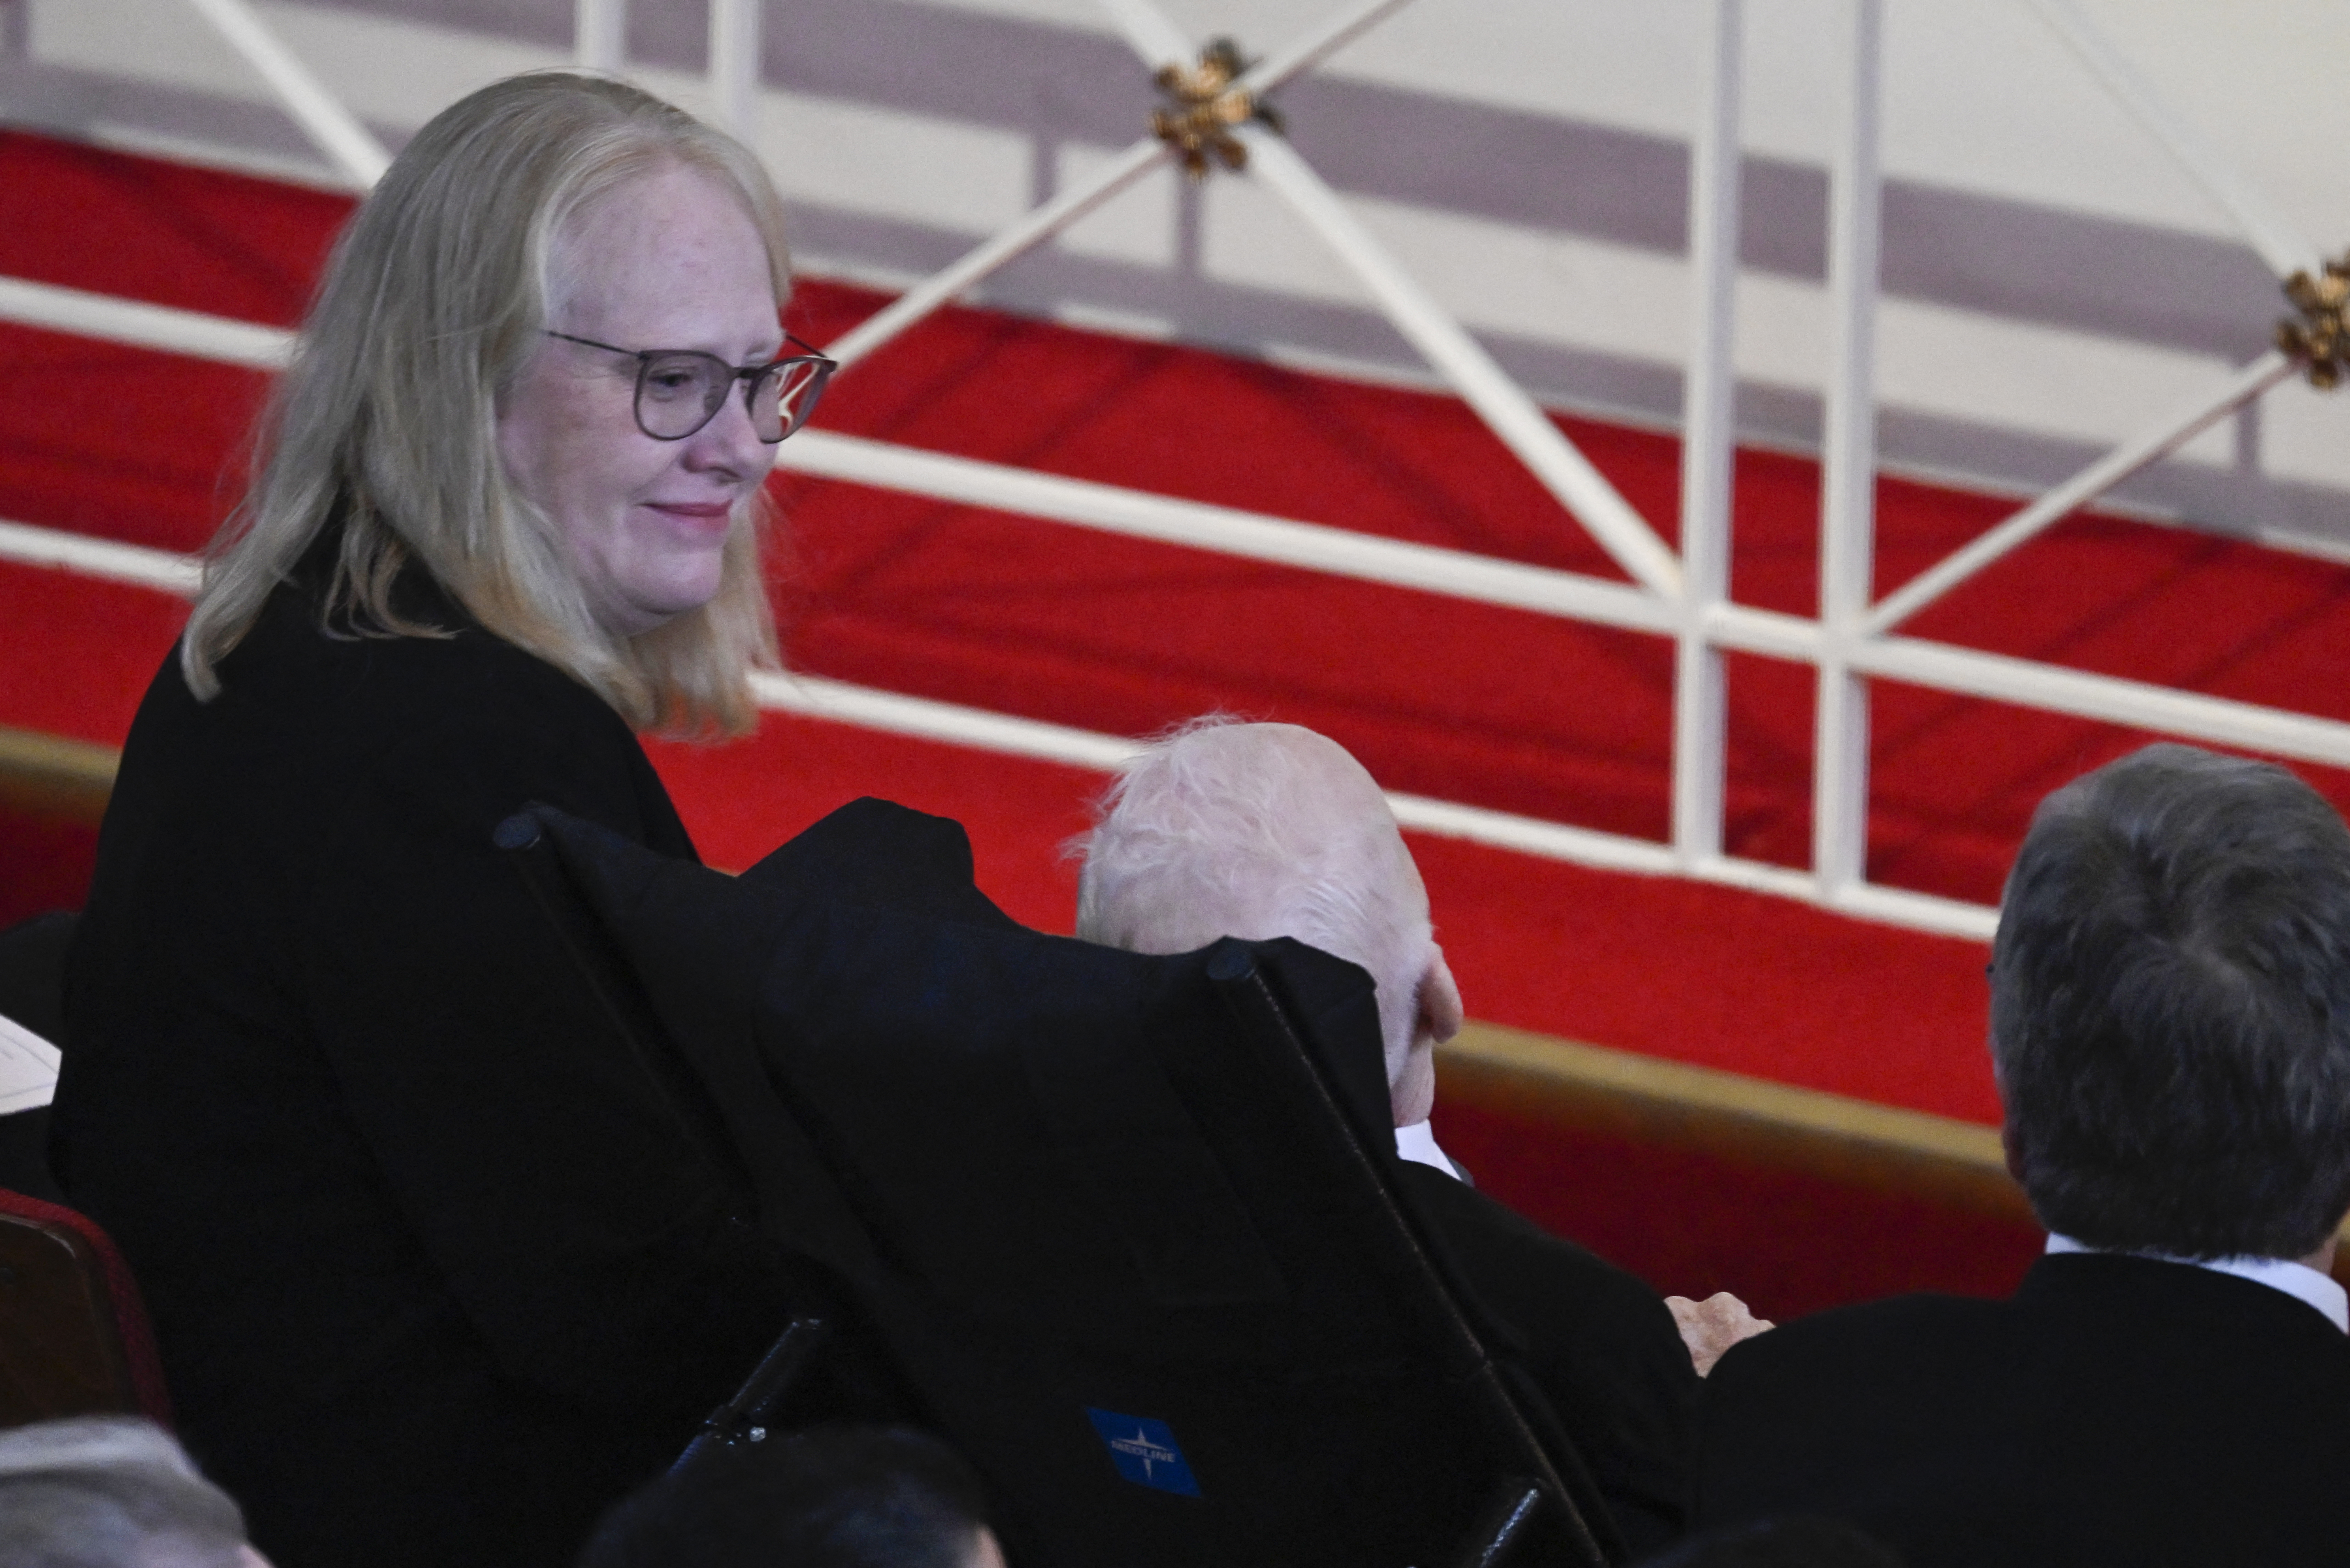 Amy Carter and former U.S. President Jimmy Carter at former U.S. First Lady Rosalynn Carter's memorial service in Atlanta, Georgia on November 28, 2023 | Source: Getty Images